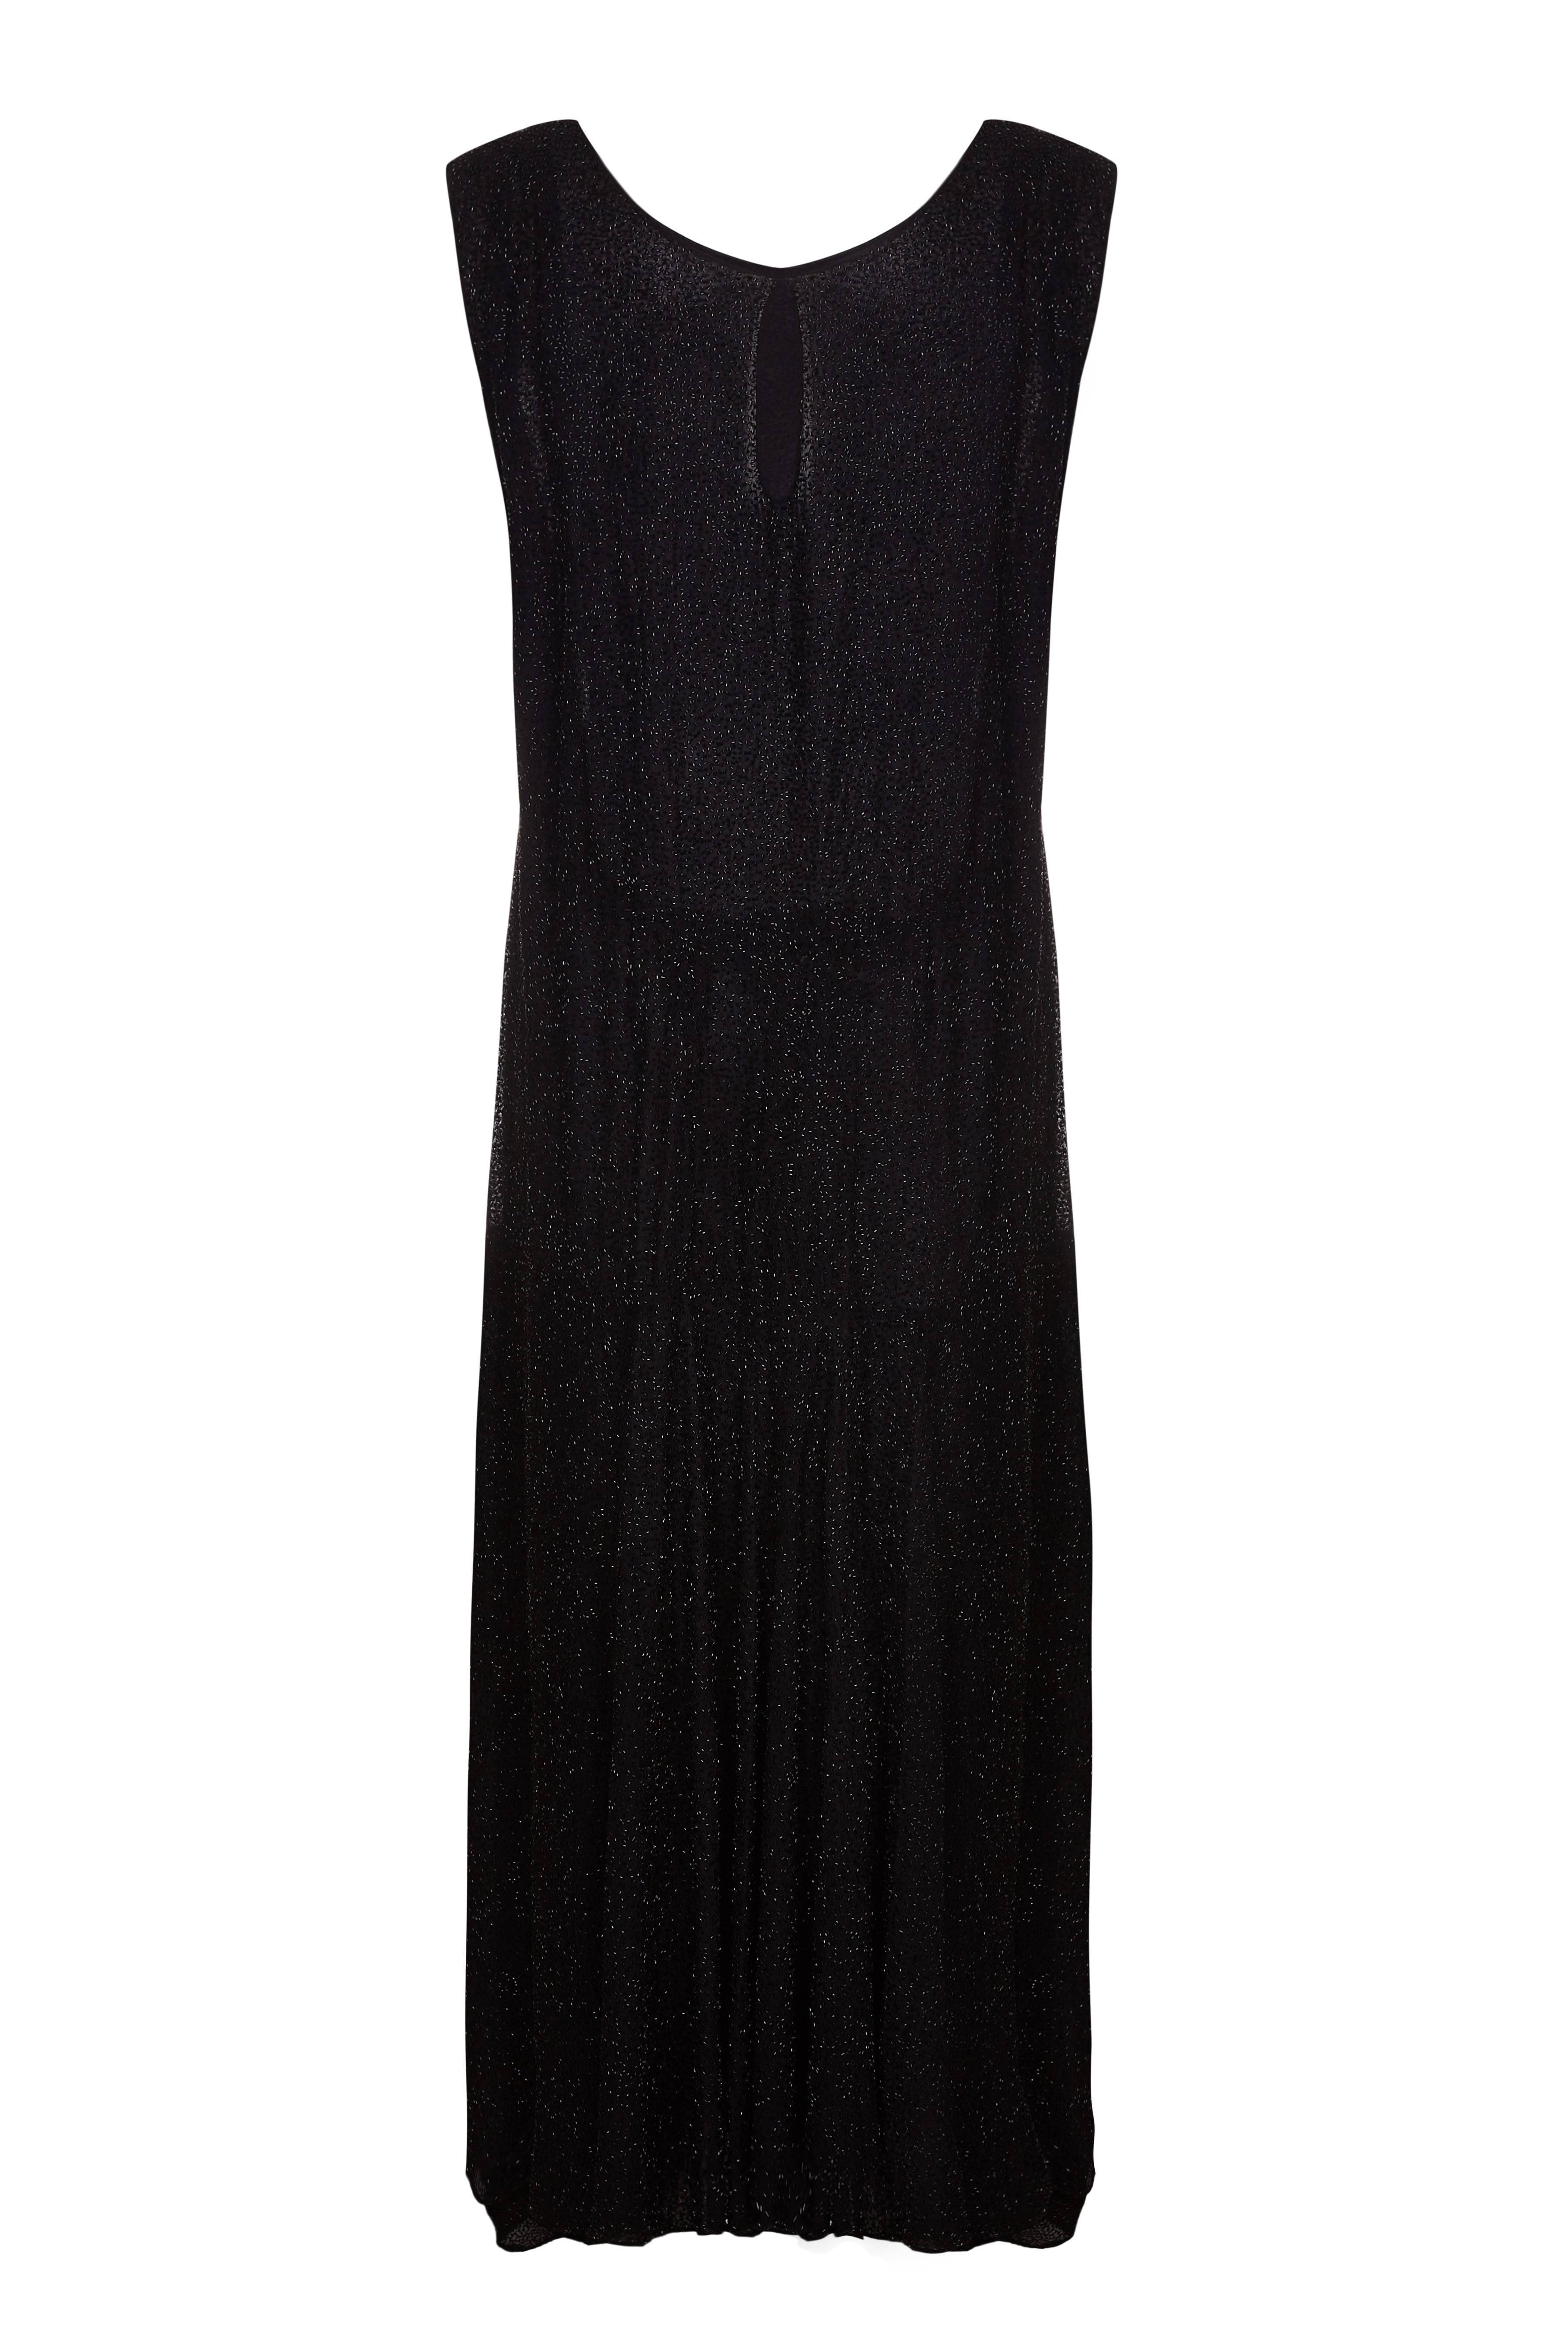 Beautiful original vintage and wearable 1920s black flapper dress completely covered in tiny black beads.  The dress is slightly flared in the skirt and features a peep hole at the back of the neckline and two ties that fall to the front which can